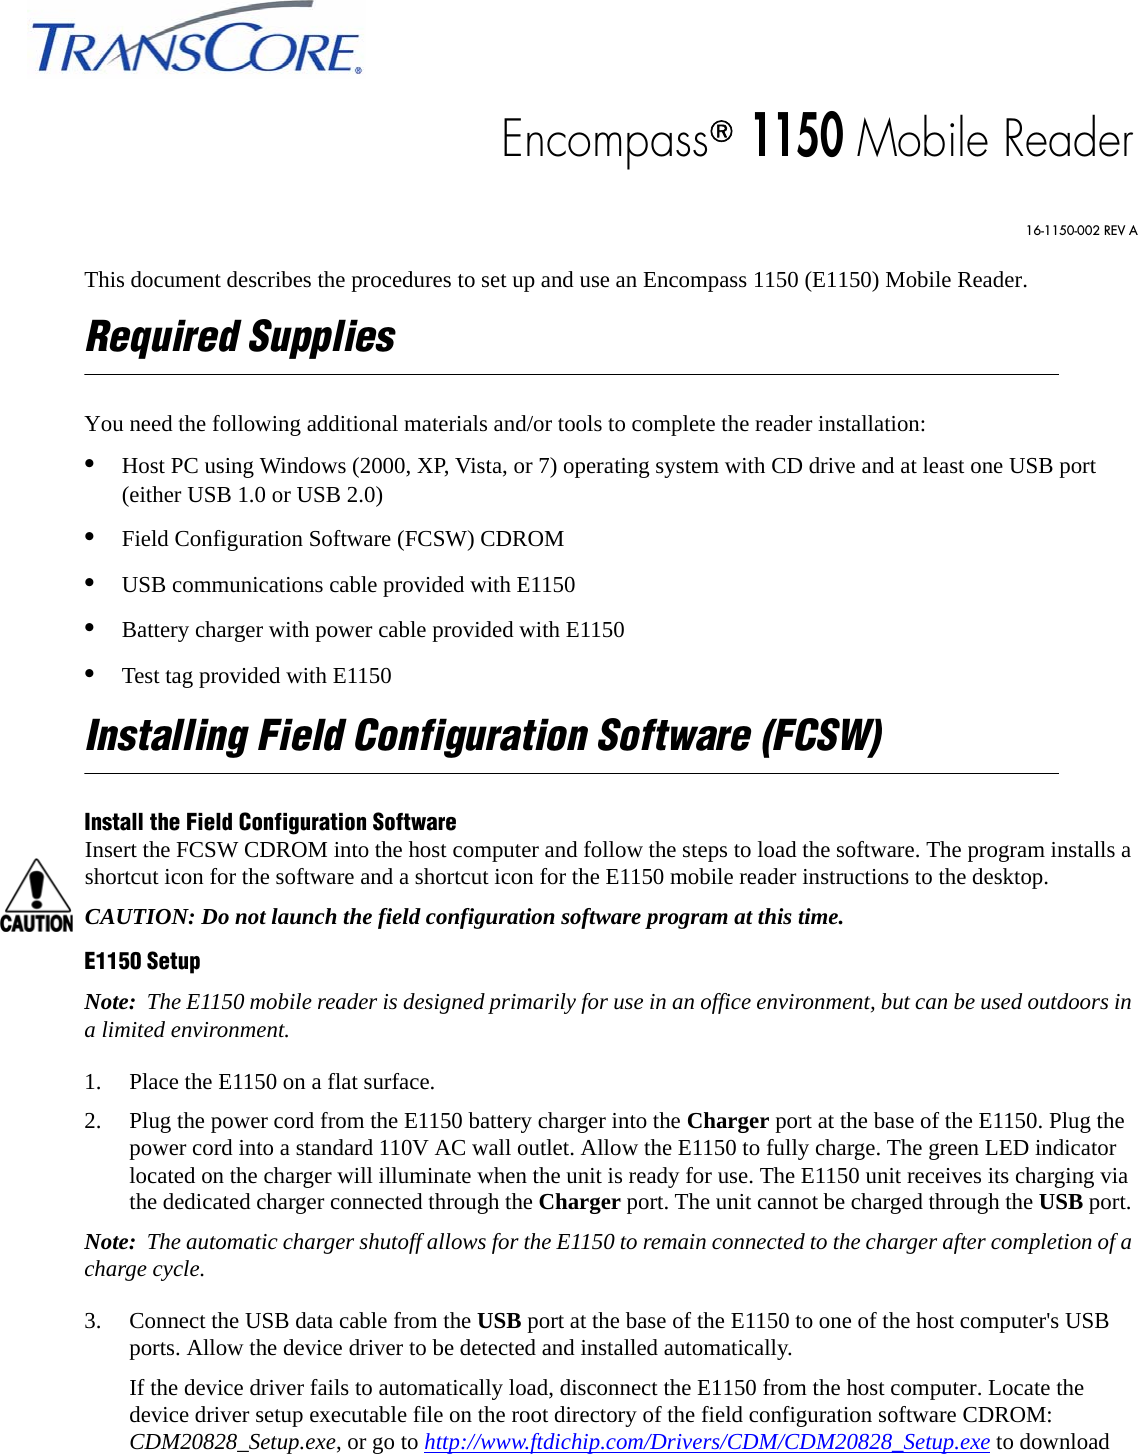 This document describes the procedures to set up and use an Encompass 1150 (E1150) Mobile Reader. Required SuppliesYou need the following additional materials and/or tools to complete the reader installation:•Host PC using Windows (2000, XP, Vista, or 7) operating system with CD drive and at least one USB port (either USB 1.0 or USB 2.0)•Field Configuration Software (FCSW) CDROM•USB communications cable provided with E1150•Battery charger with power cable provided with E1150•Test tag provided with E1150Installing Field Configuration Software (FCSW)Install the Field Configuration SoftwareInsert the FCSW CDROM into the host computer and follow the steps to load the software. The program installs a shortcut icon for the software and a shortcut icon for the E1150 mobile reader instructions to the desktop.CAUTION: Do not launch the field configuration software program at this time.E1150 SetupNote:  The E1150 mobile reader is designed primarily for use in an office environment, but can be used outdoors in a limited environment.1. Place the E1150 on a flat surface.2. Plug the power cord from the E1150 battery charger into the Charger port at the base of the E1150. Plug the power cord into a standard 110V AC wall outlet. Allow the E1150 to fully charge. The green LED indicator located on the charger will illuminate when the unit is ready for use. The E1150 unit receives its charging via the dedicated charger connected through the Charger port. The unit cannot be charged through the USB port. Note:  The automatic charger shutoff allows for the E1150 to remain connected to the charger after completion of a charge cycle.3. Connect the USB data cable from the USB port at the base of the E1150 to one of the host computer&apos;s USB ports. Allow the device driver to be detected and installed automatically. If the device driver fails to automatically load, disconnect the E1150 from the host computer. Locate the device driver setup executable file on the root directory of the field configuration software CDROM: CDM20828_Setup.exe, or go to http://www.ftdichip.com/Drivers/CDM/CDM20828_Setup.exe to download Encompass® 1150 Mobile Reader16-1150-002 REV A